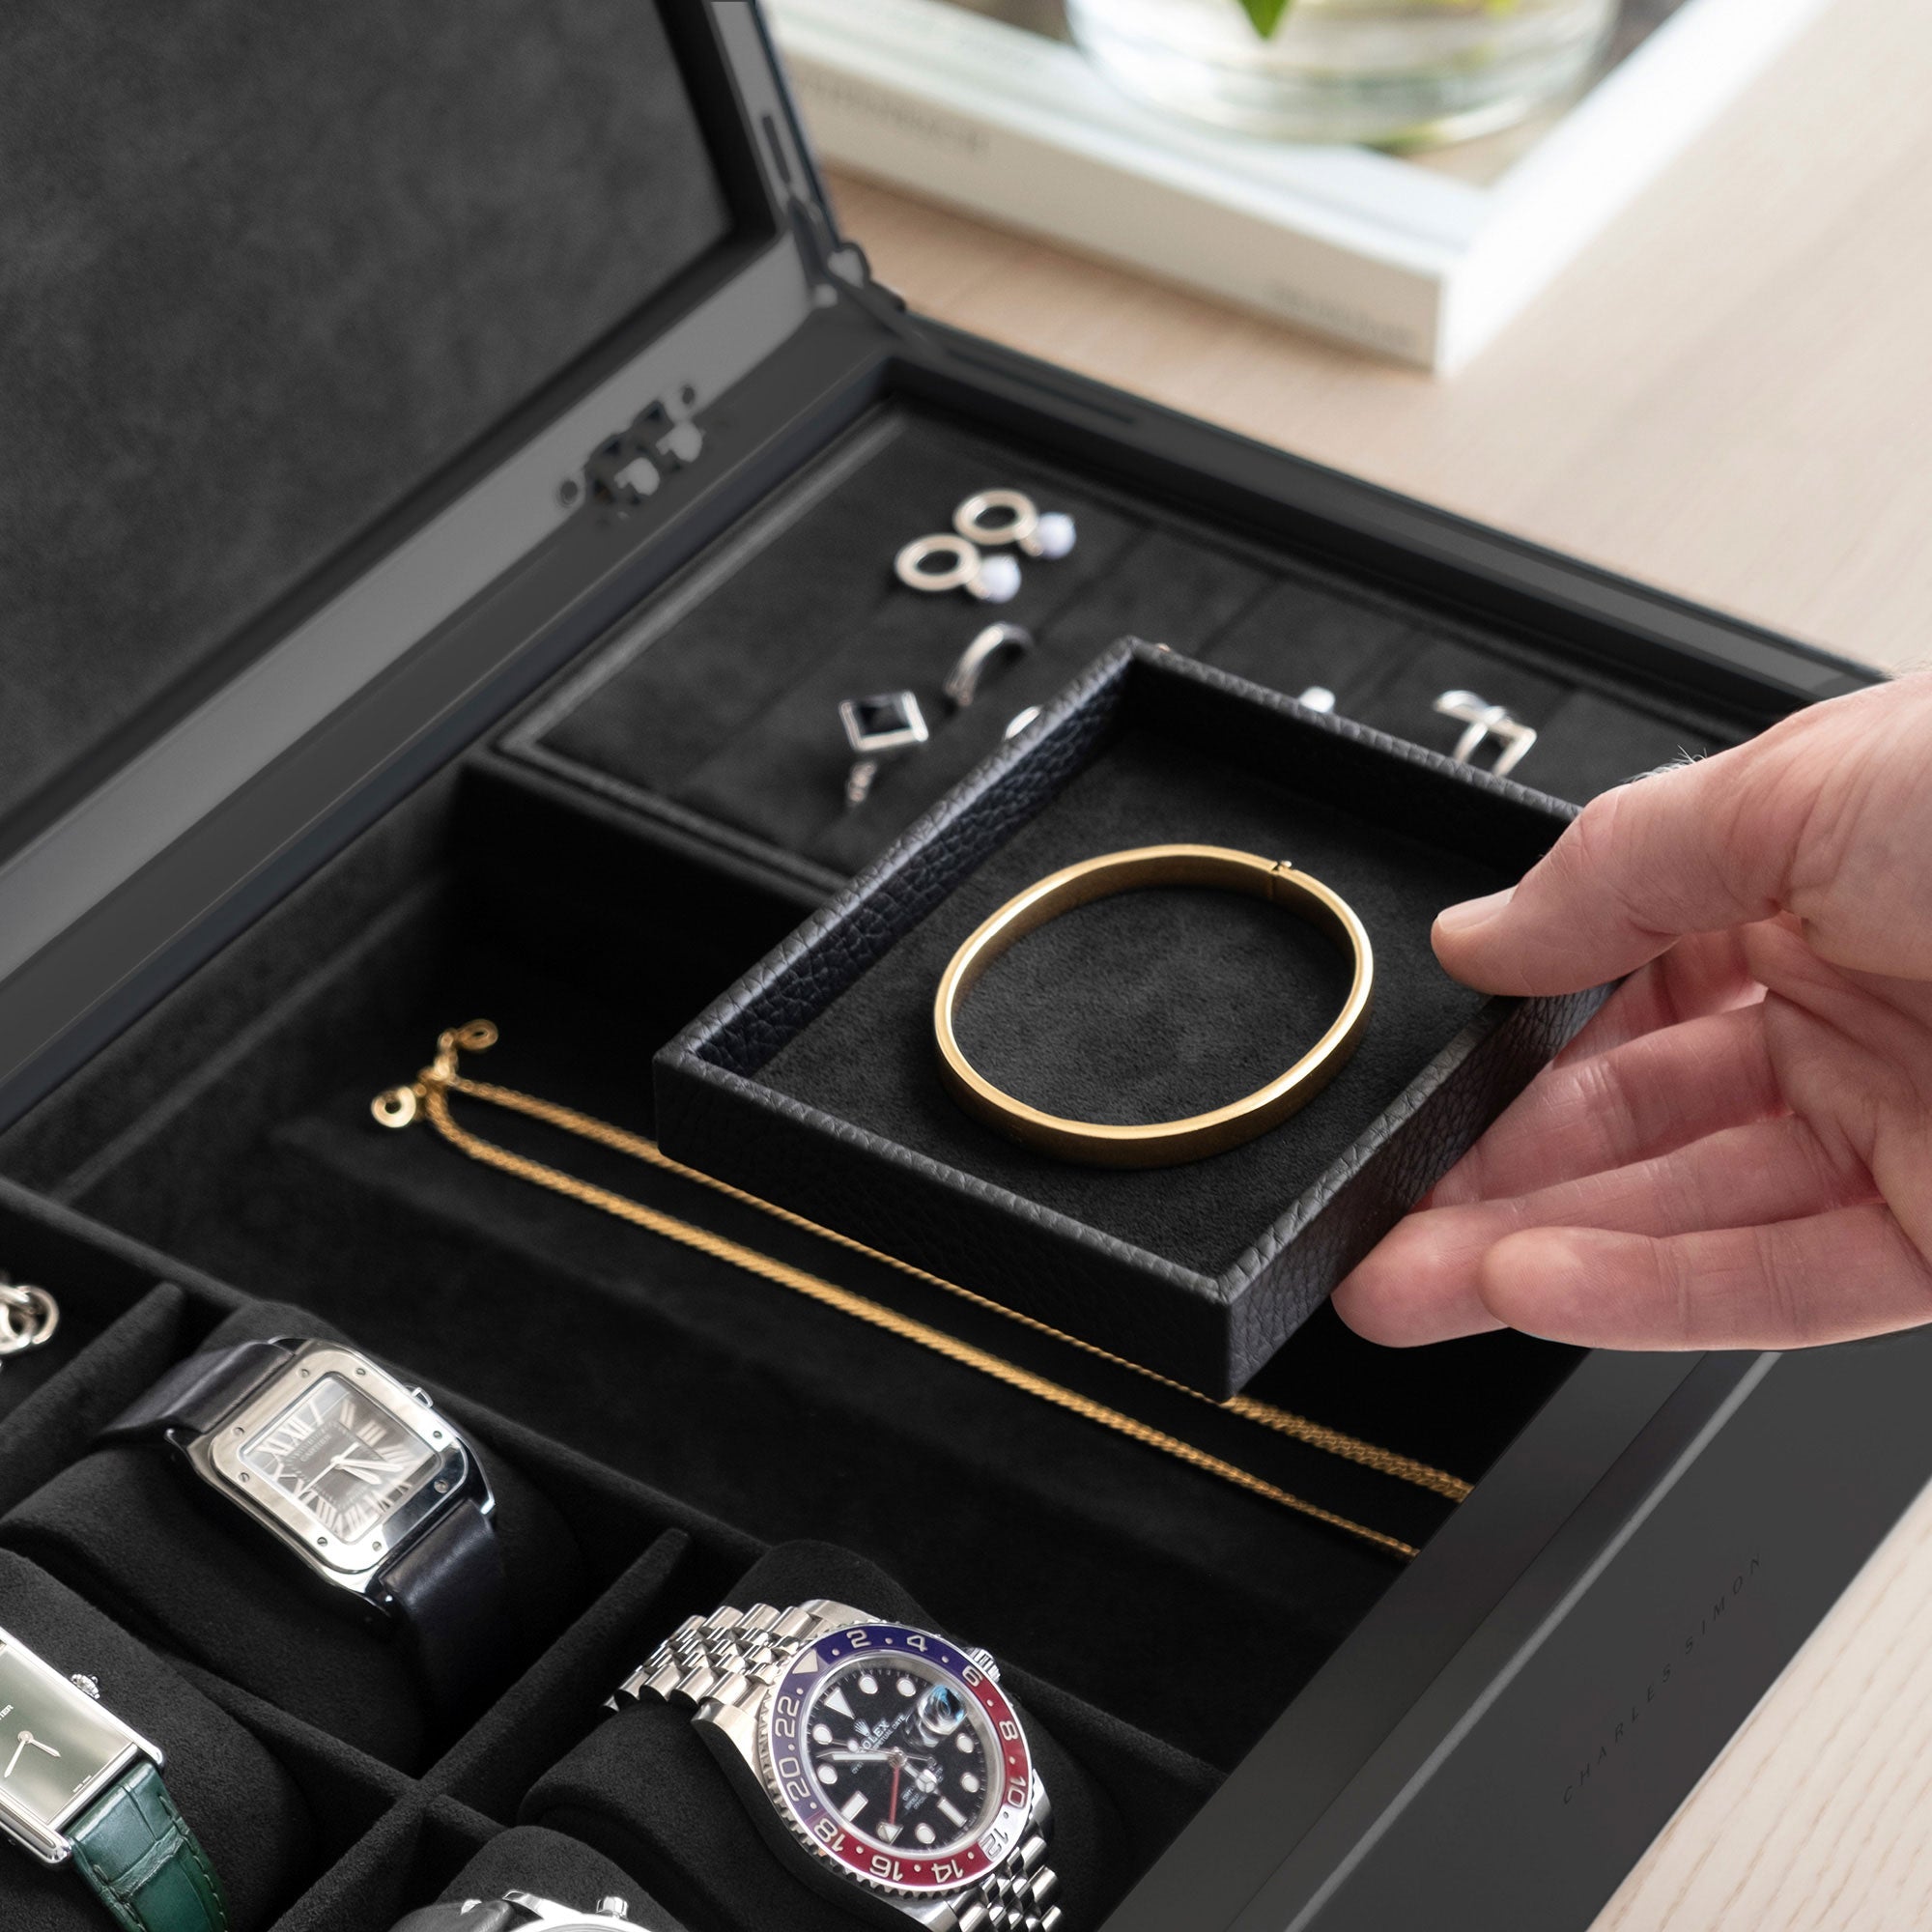 Detail photo of man holding mobile jewelry tray containing a gold bracelet from the all black Taylor 4 Watch and Jewelry box. The Taylor 4 Watch and Jewelry box is storing 4 luxury watches and a collection of fine jewelry, including silver rings, earrings, bracelets and necklaces. 